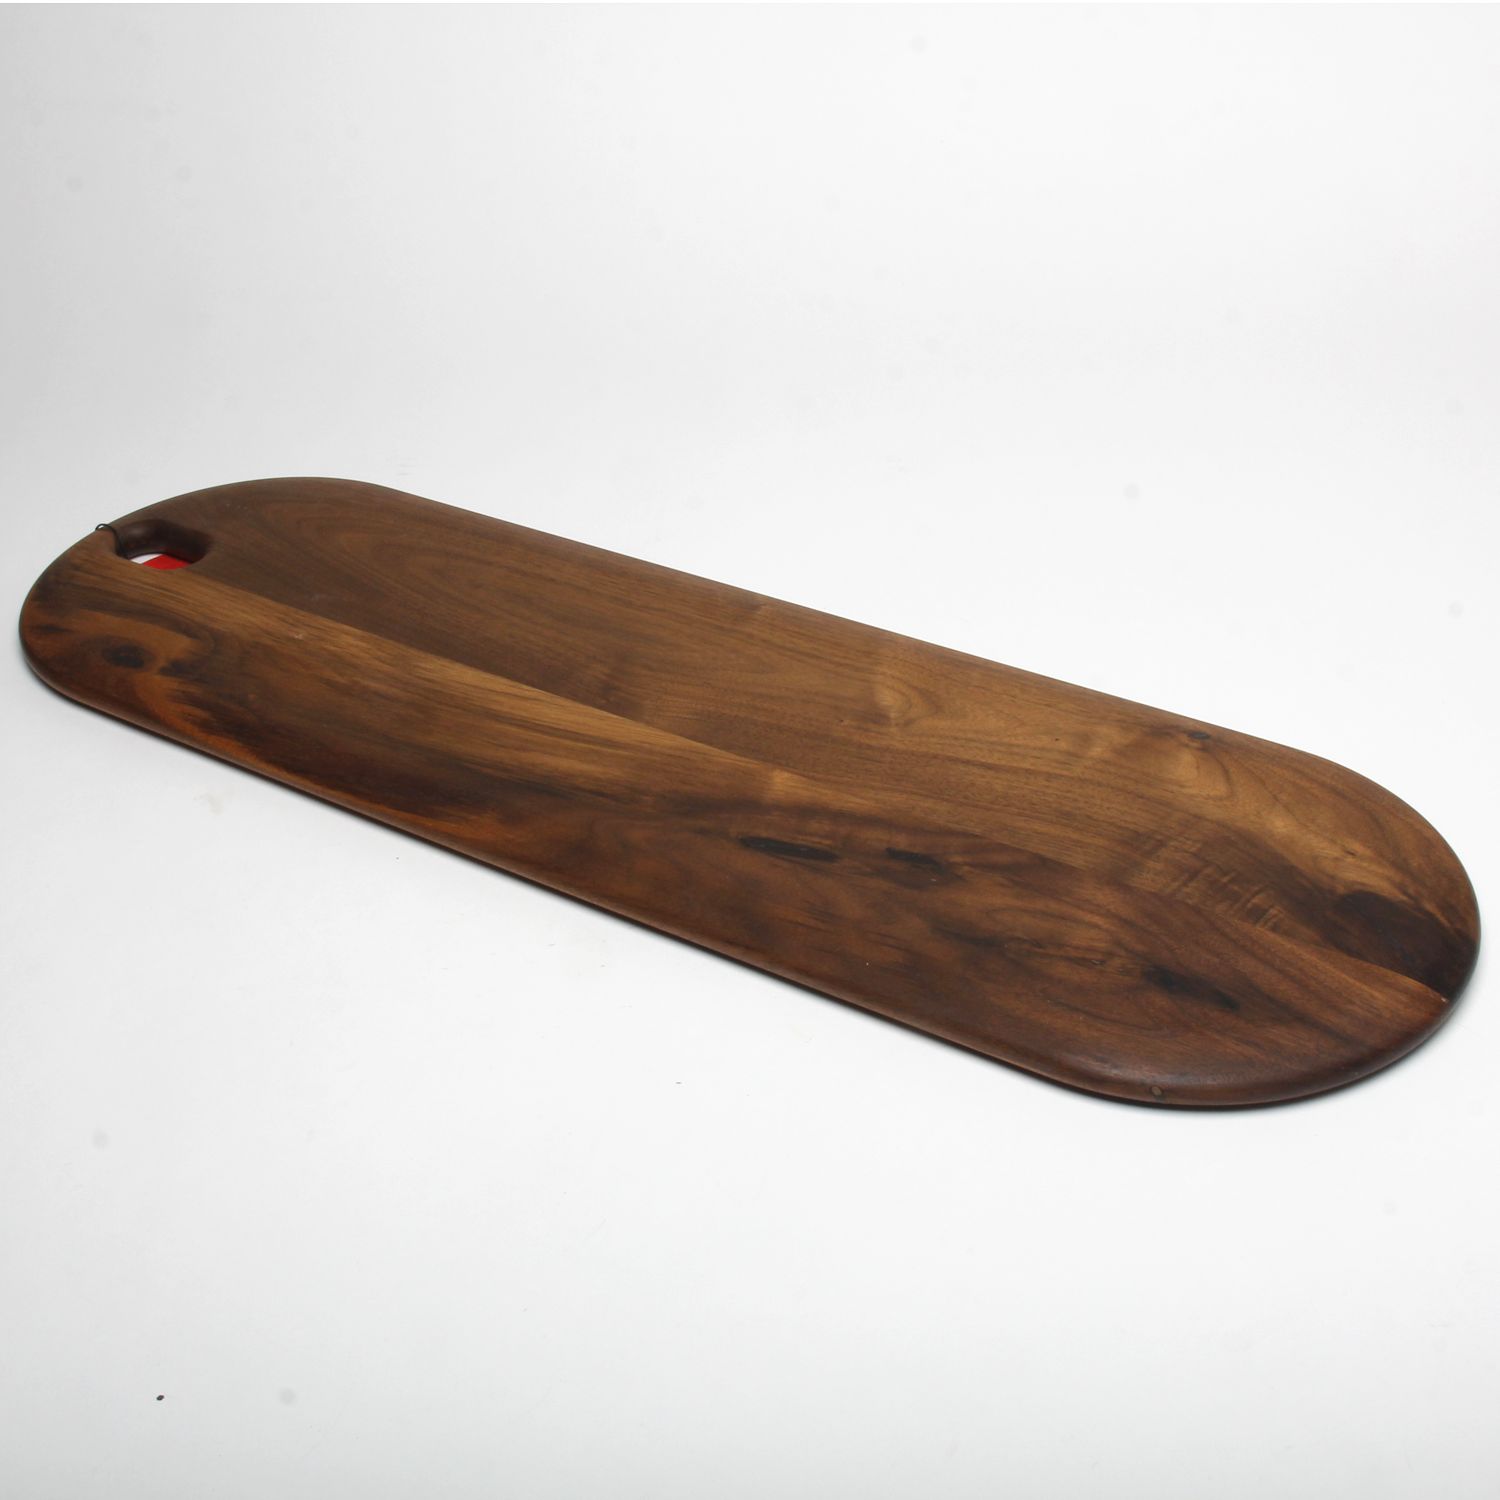 On Our Table: Board Walnut Product Image 1 of 4